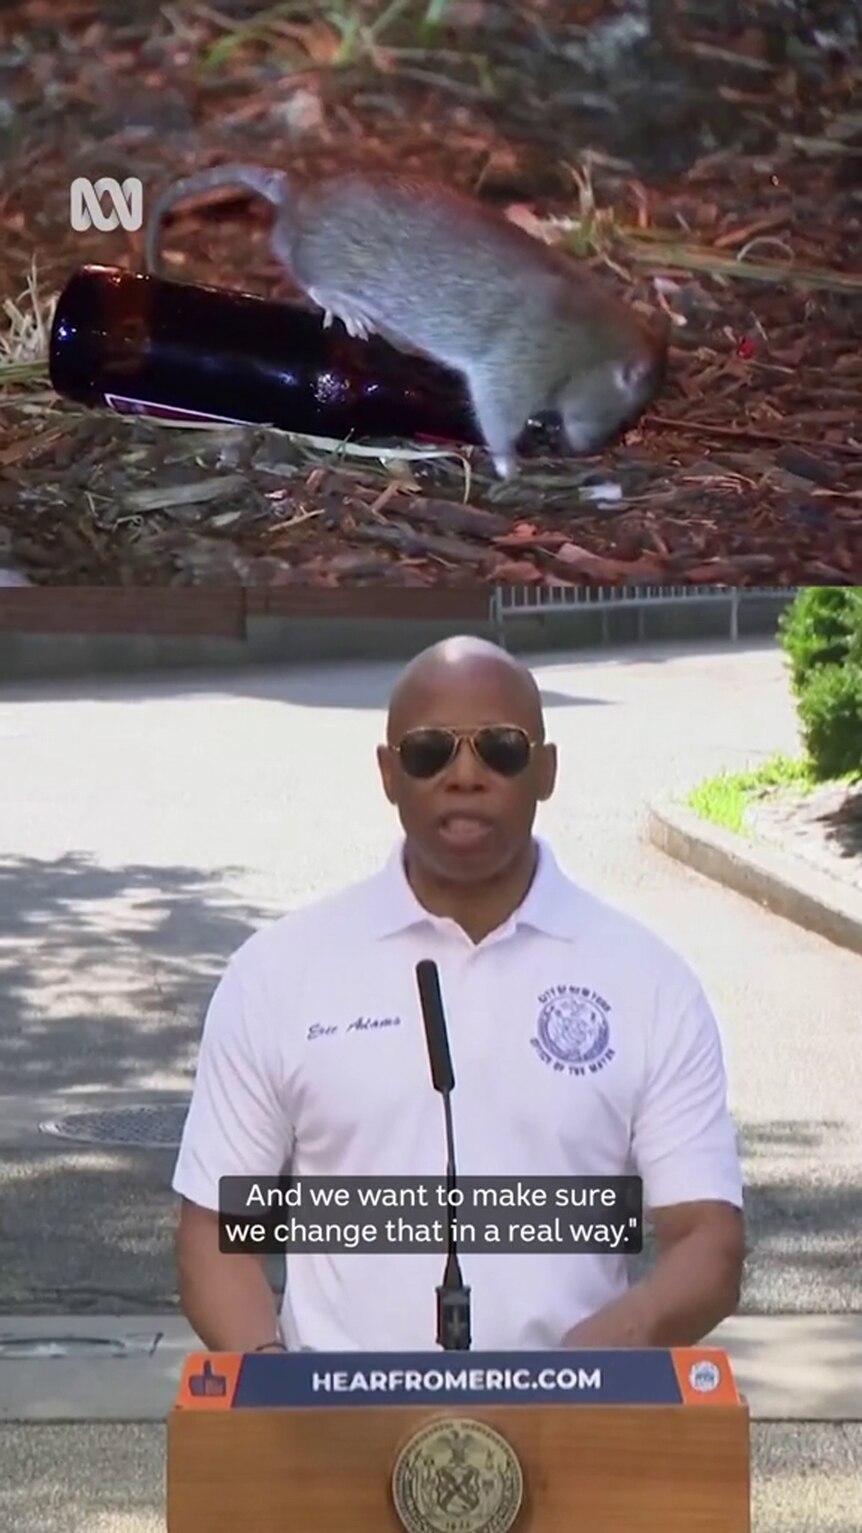 Composite image shows a rat on a bottle and a bald man with dark-tone skin in white polo shirt behind lectern